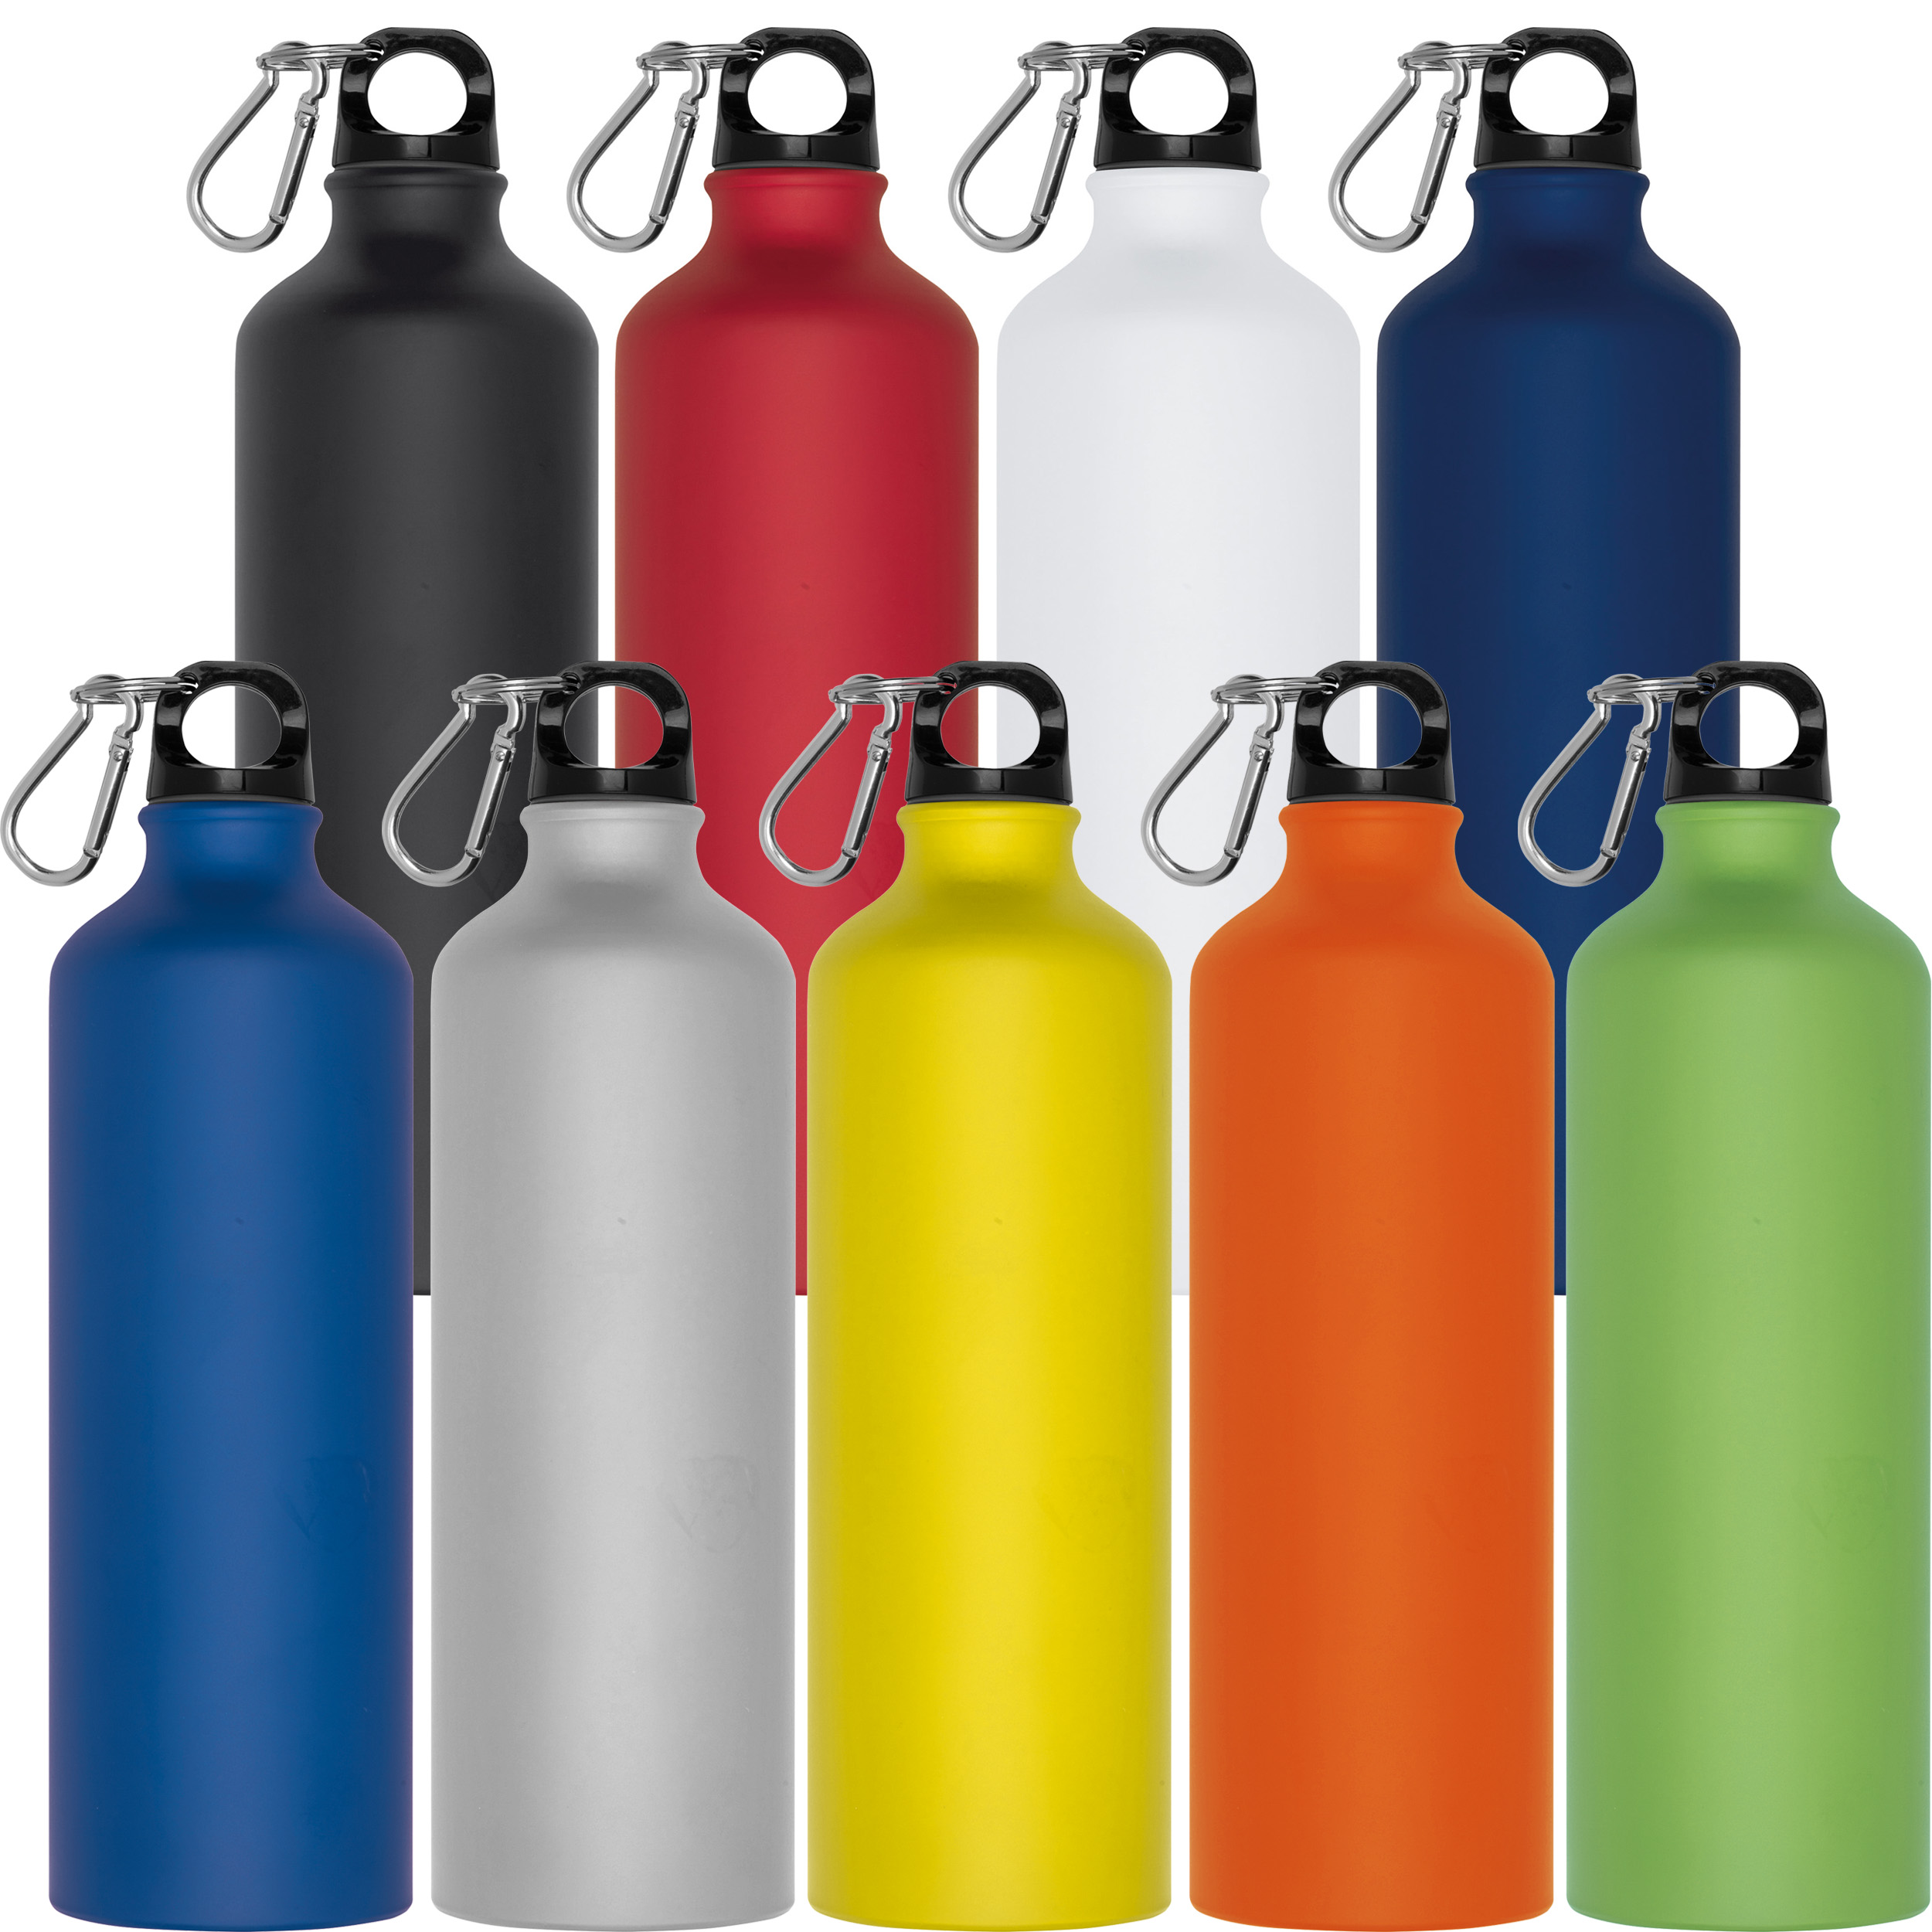 800ml Drinking bottle with snap hook